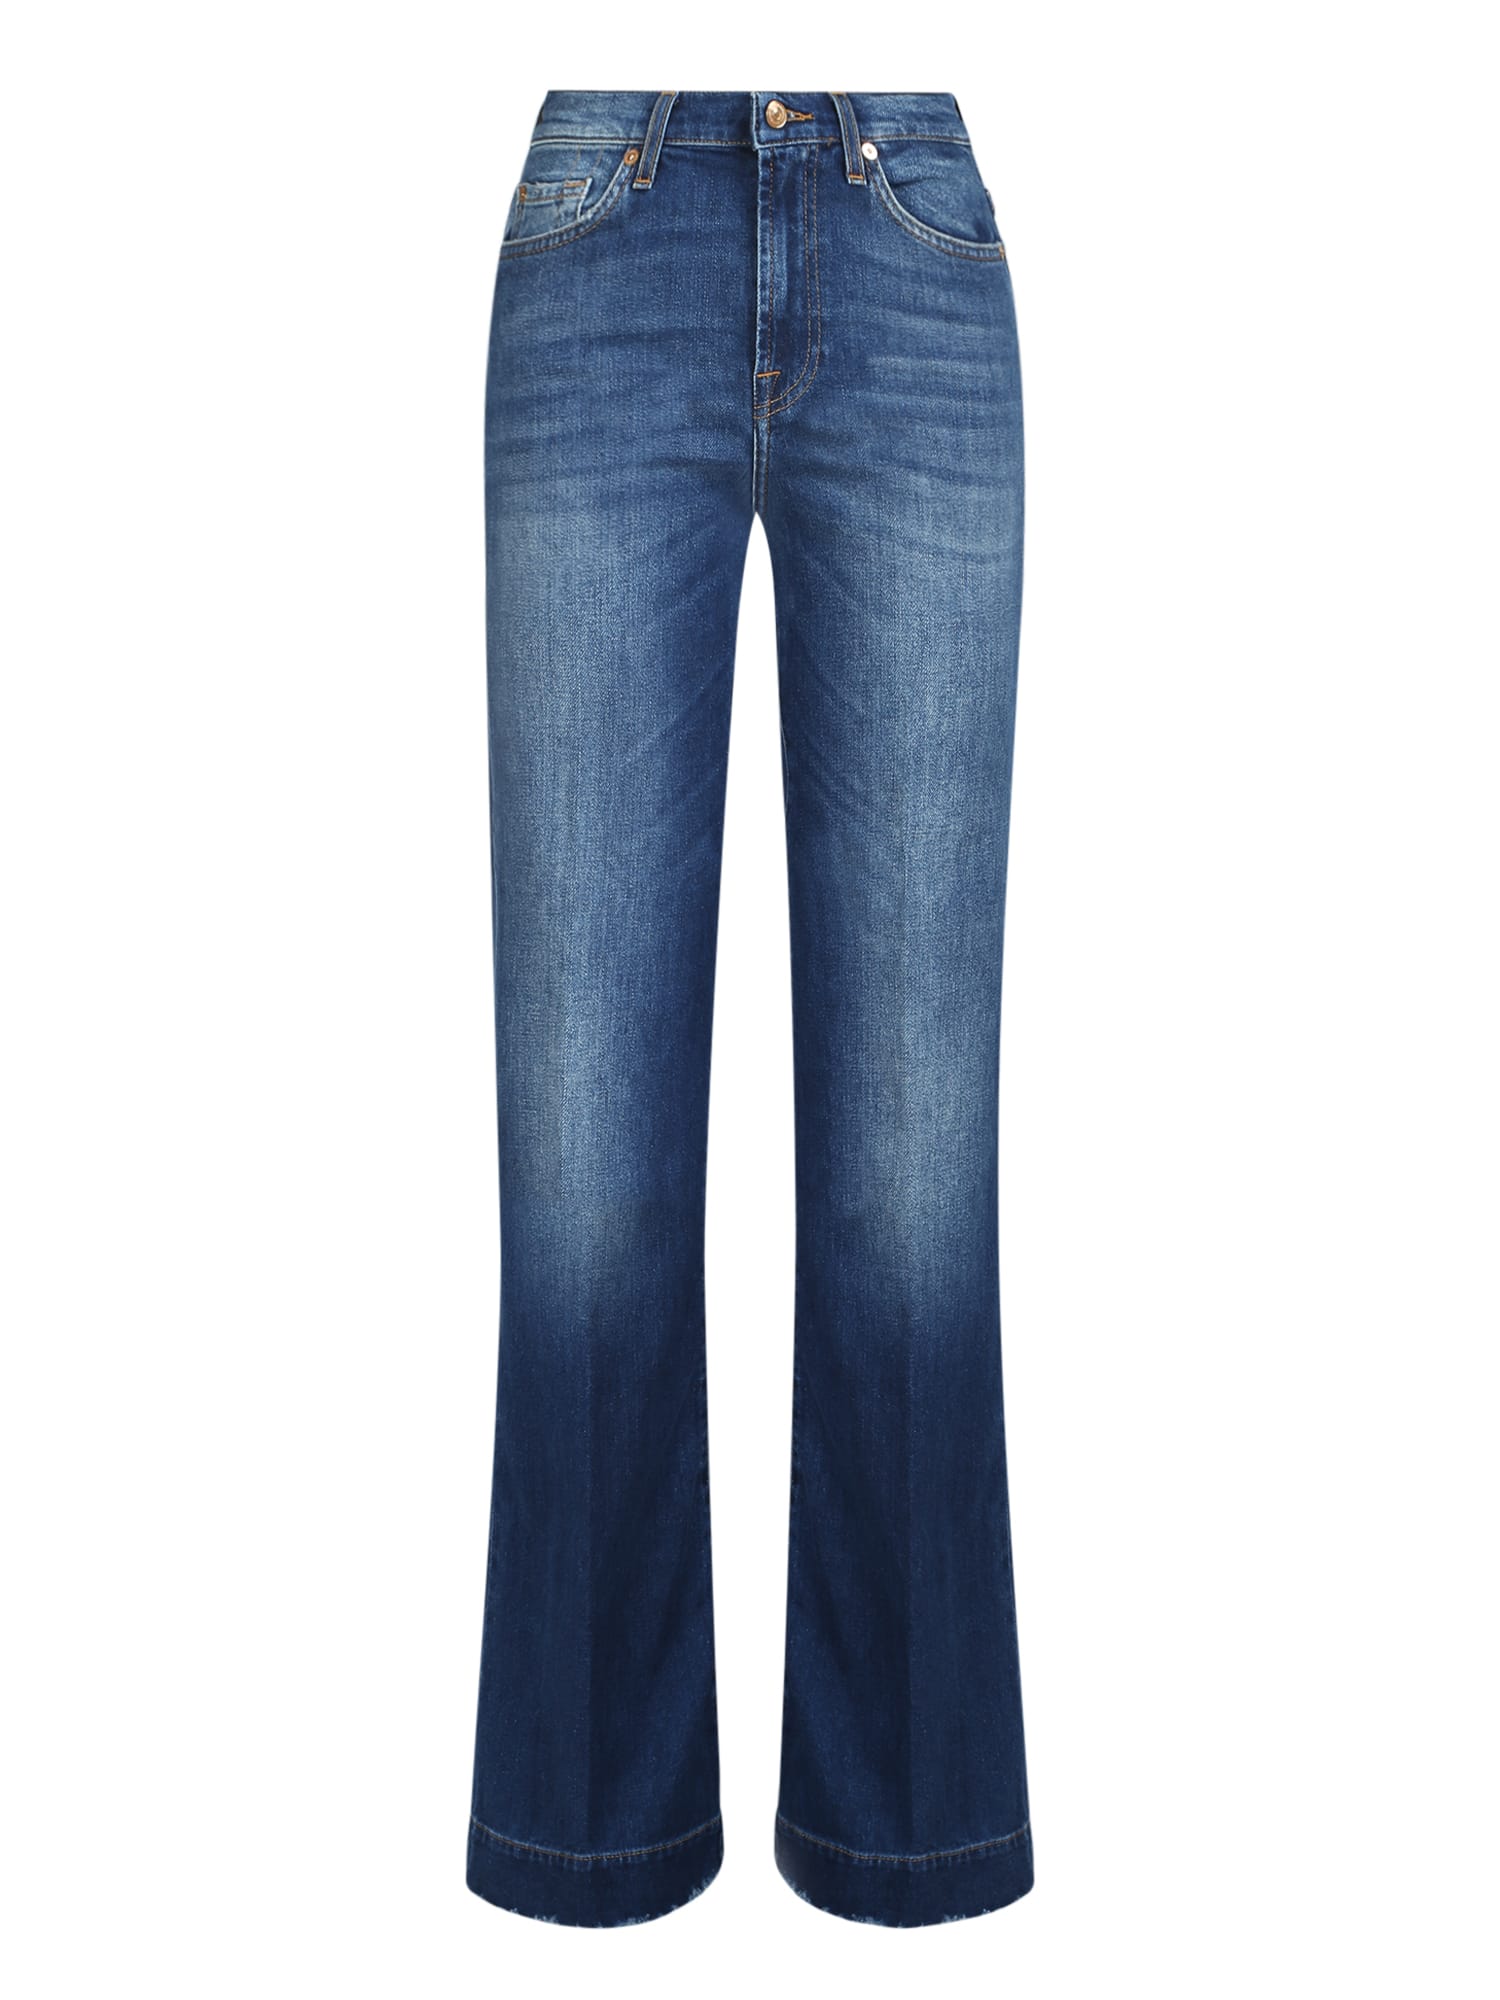 7 For All Mankind Wide Leg Jeans